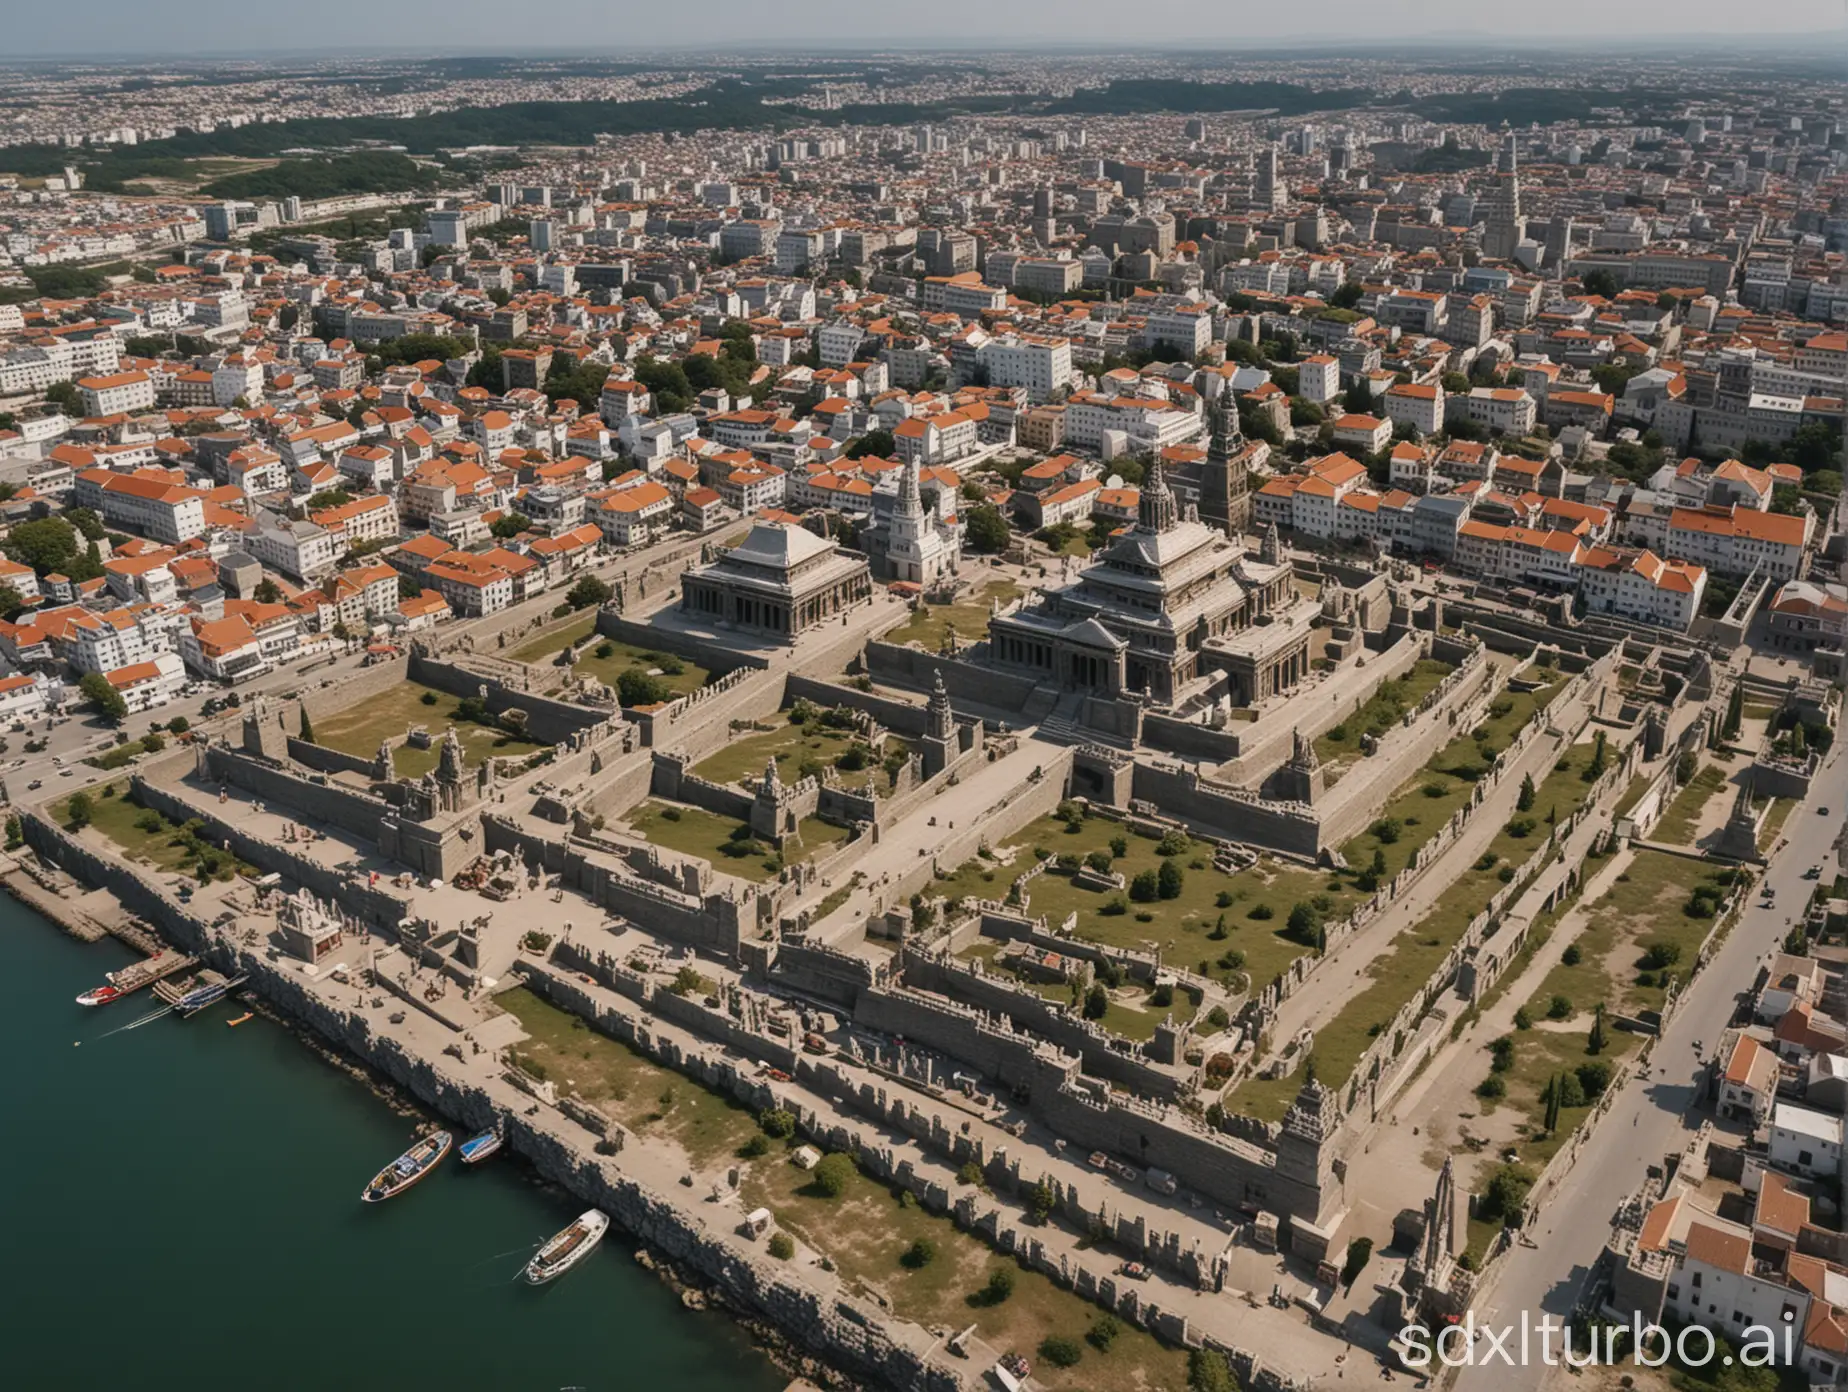 A Temple complex in the Middle of a medieval City just South of a Harbor, the Shot is far away from the temple, shot from a drone